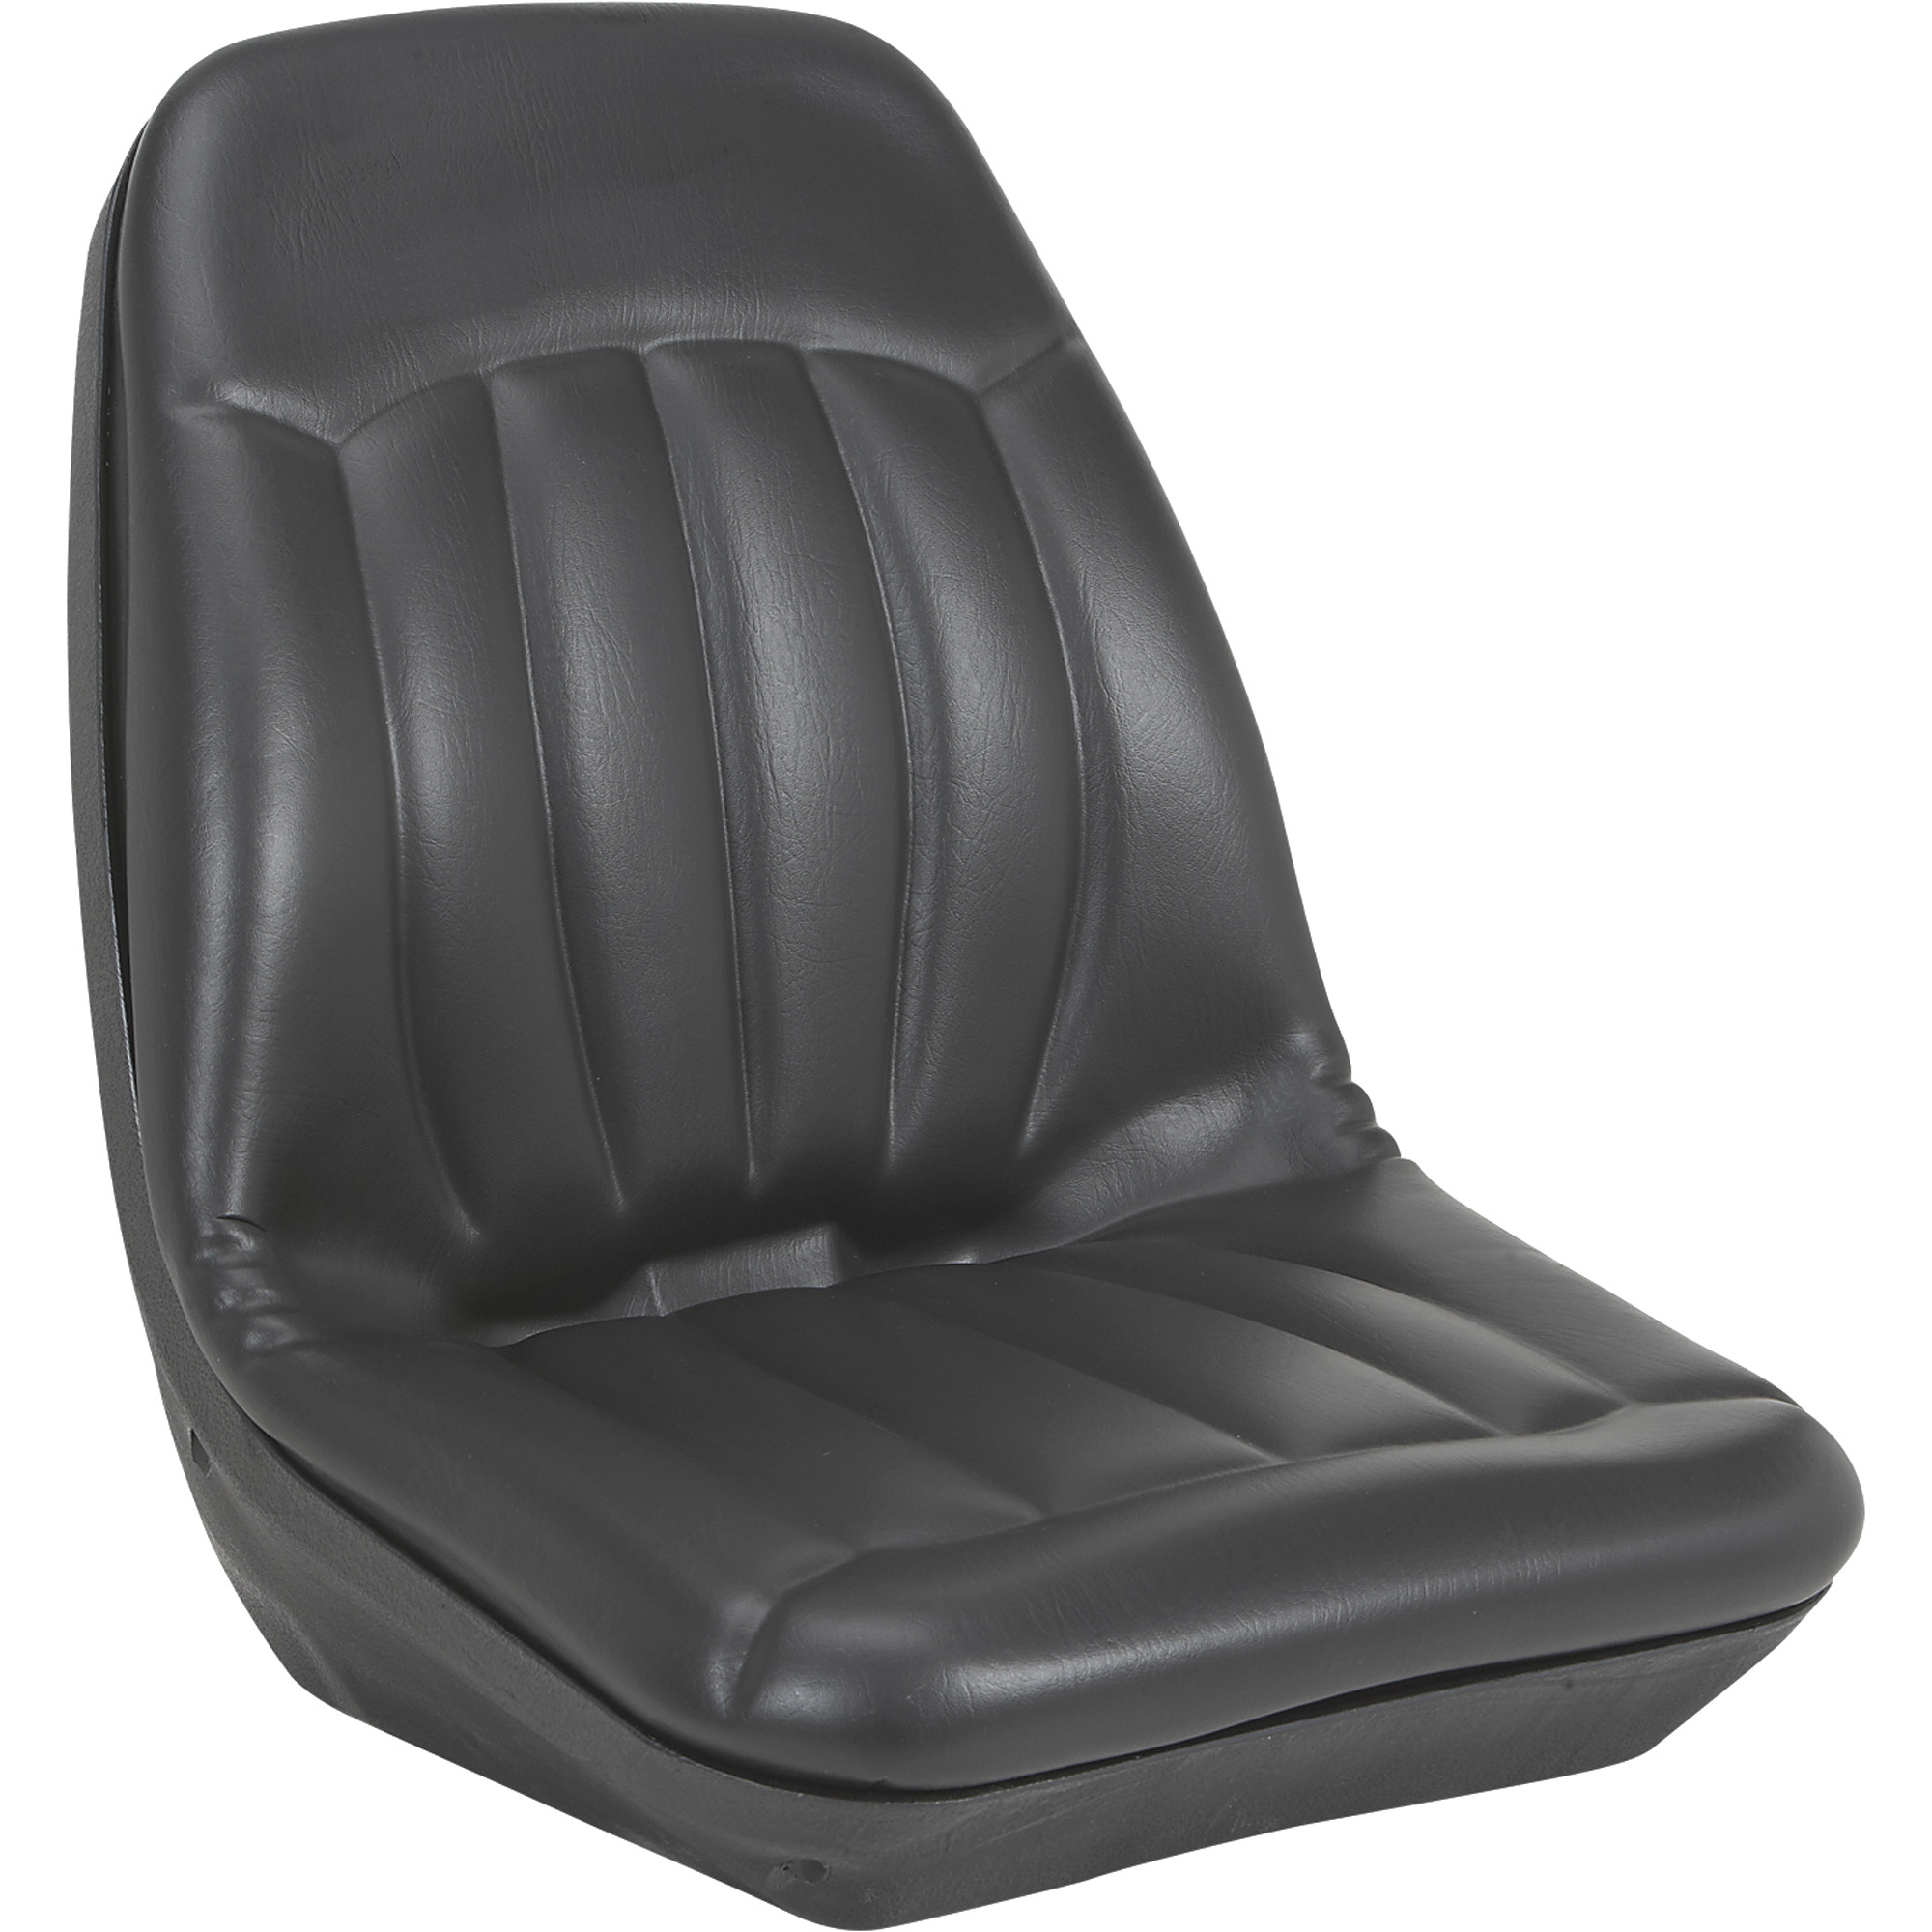 A & I Molded Tractor Seat â Black, Model V-900